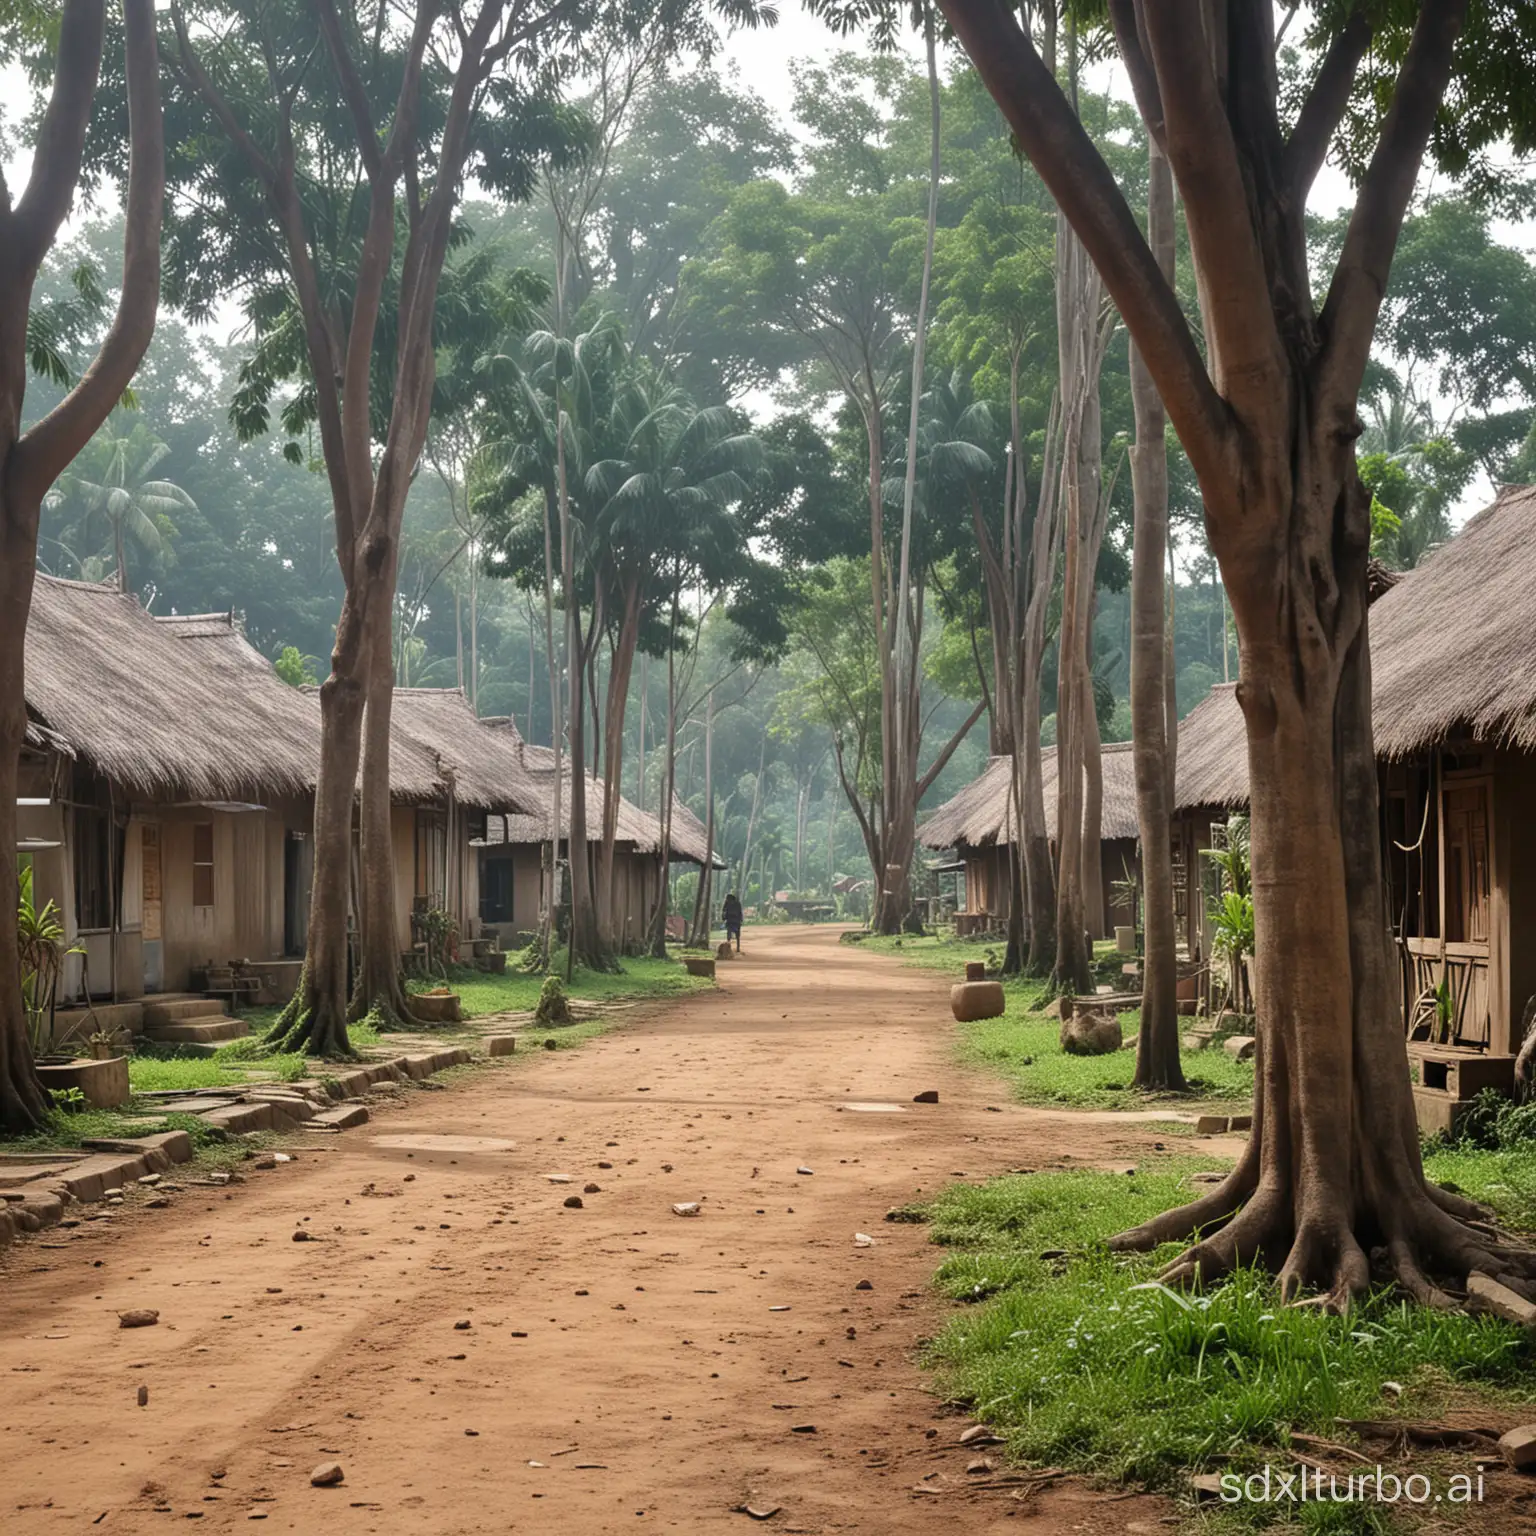 photos of villages, Indonesia, house yards, land, big trees